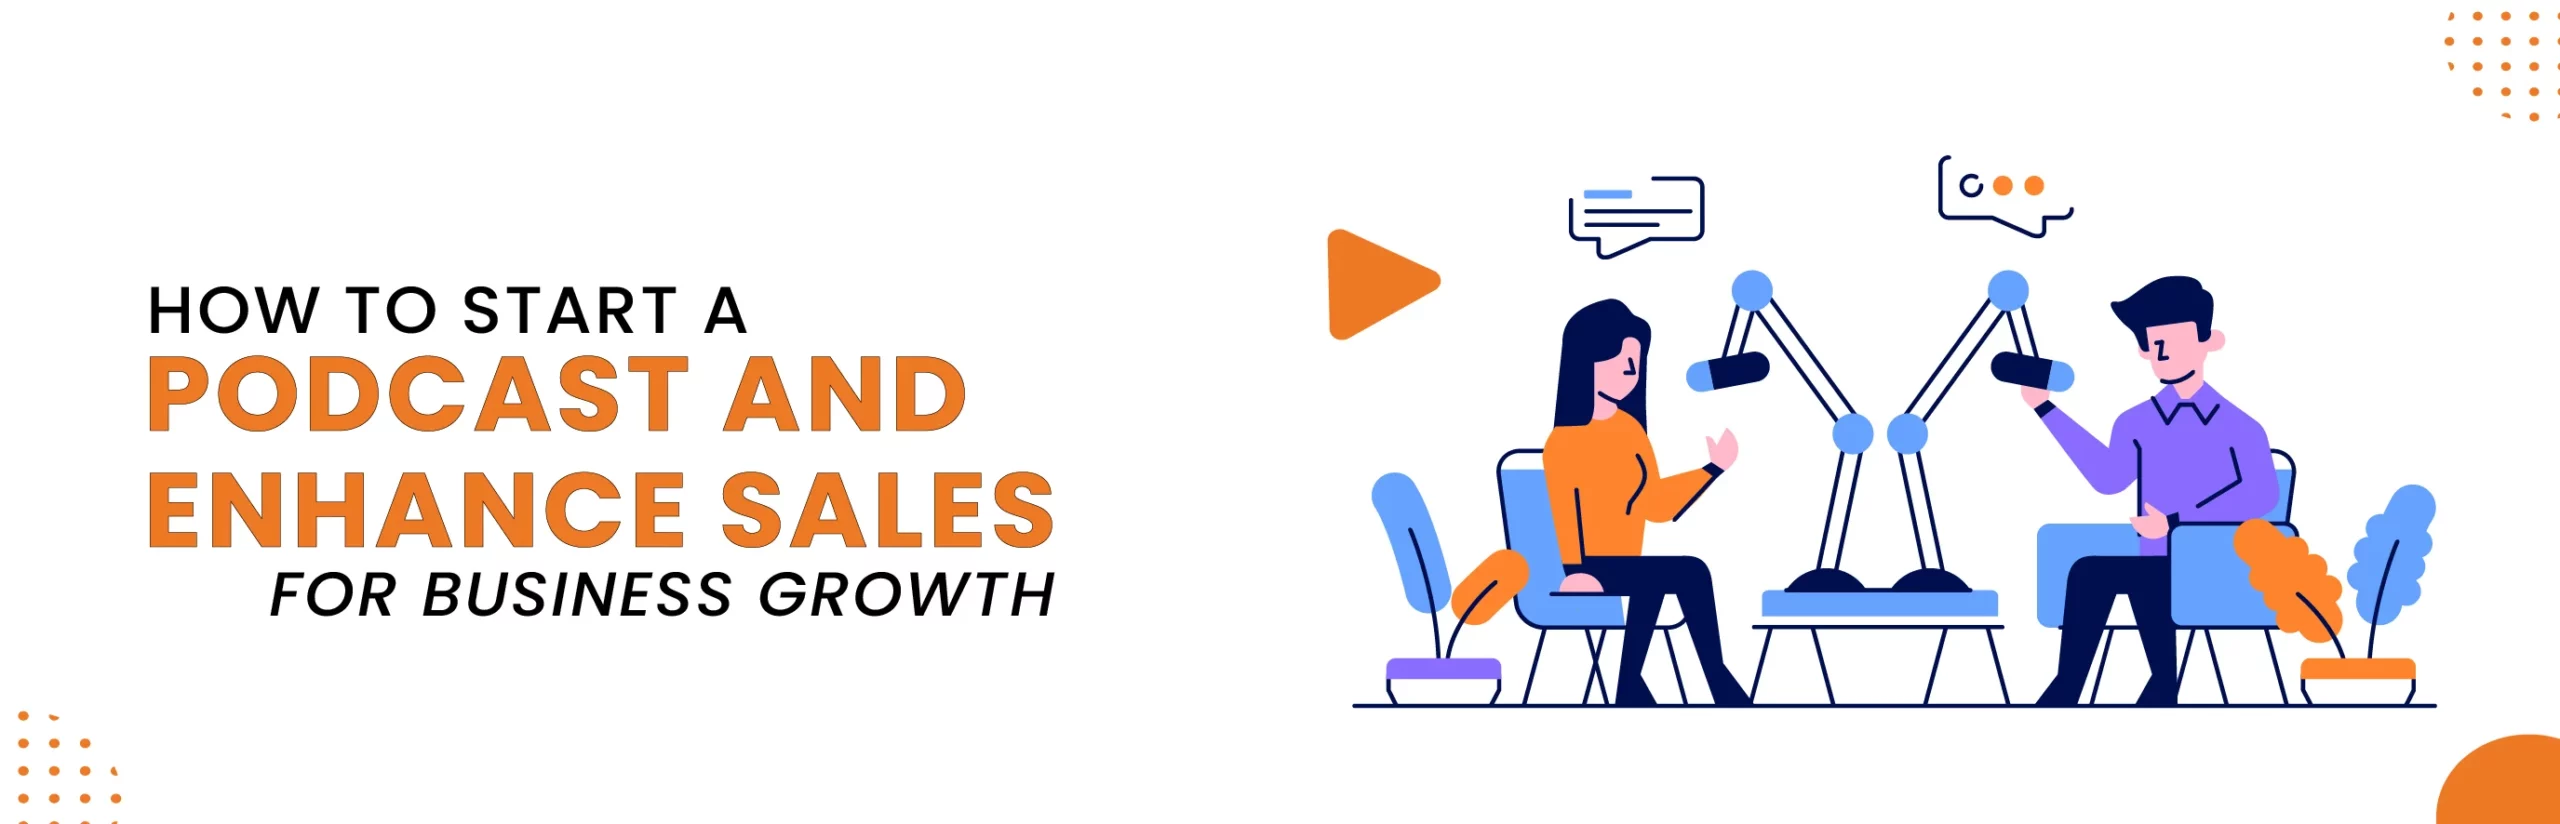 How To Start A Podcast and Enhance Sales for Business Growth